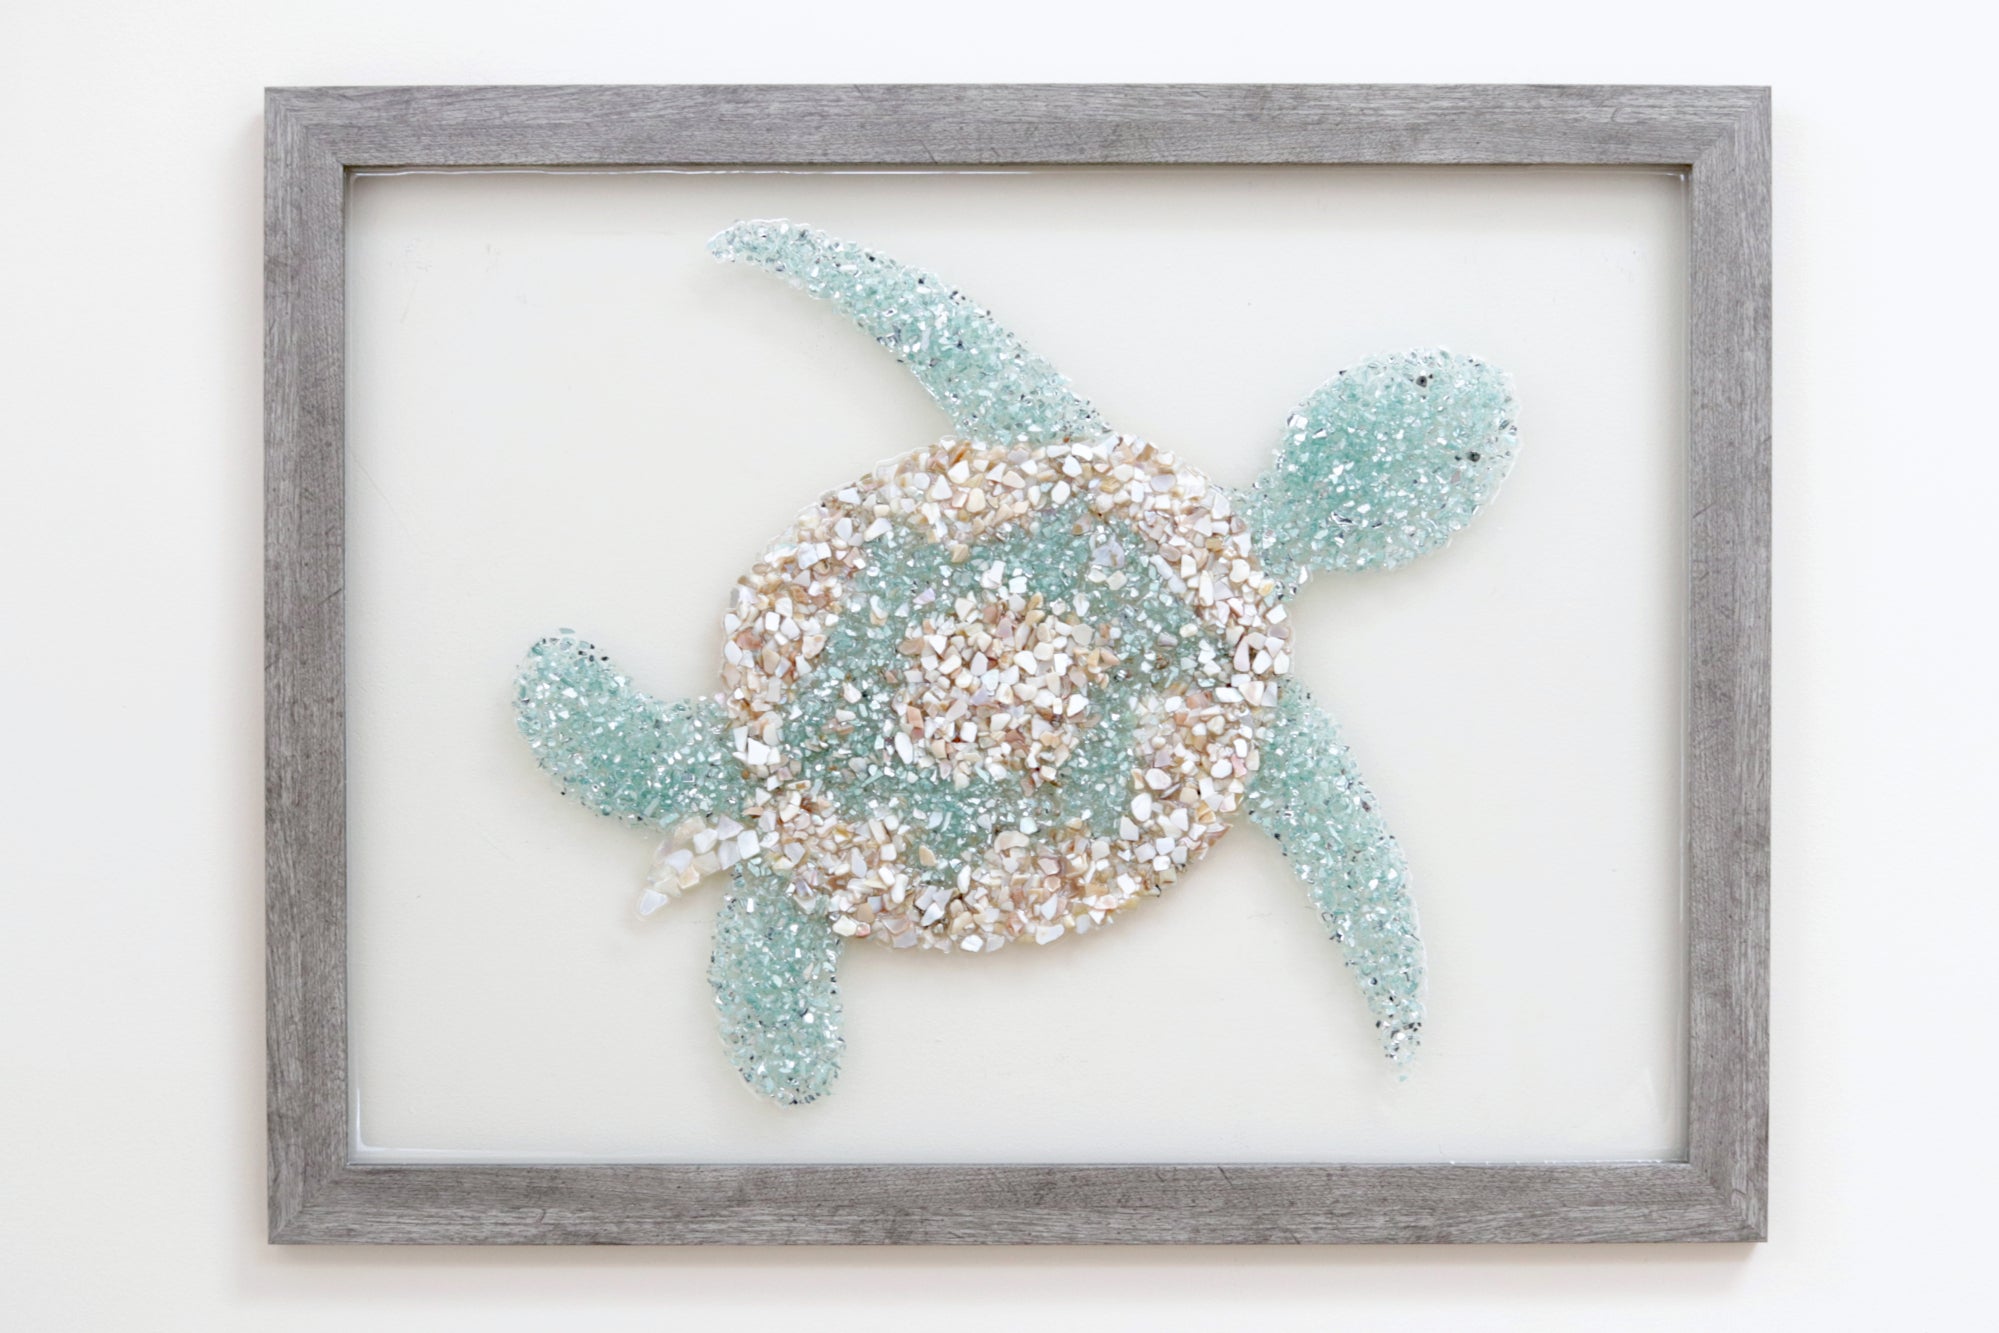 Large Turtle Sea Glass and Shells Resin Art, 20x26